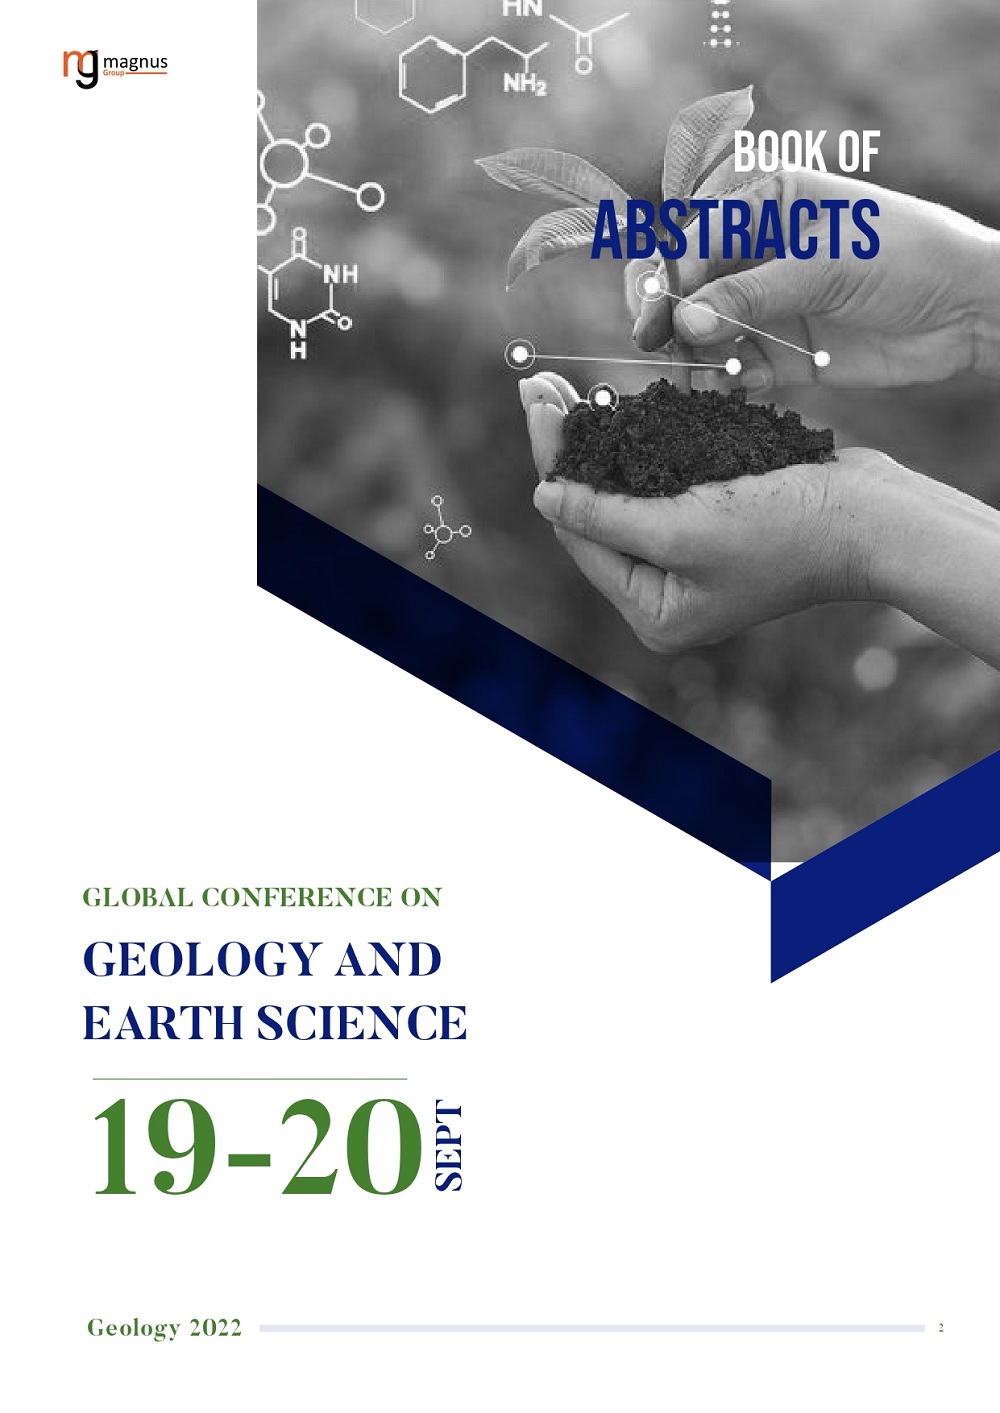 Global Conference on  Geology and Earth Science | Online Event Book